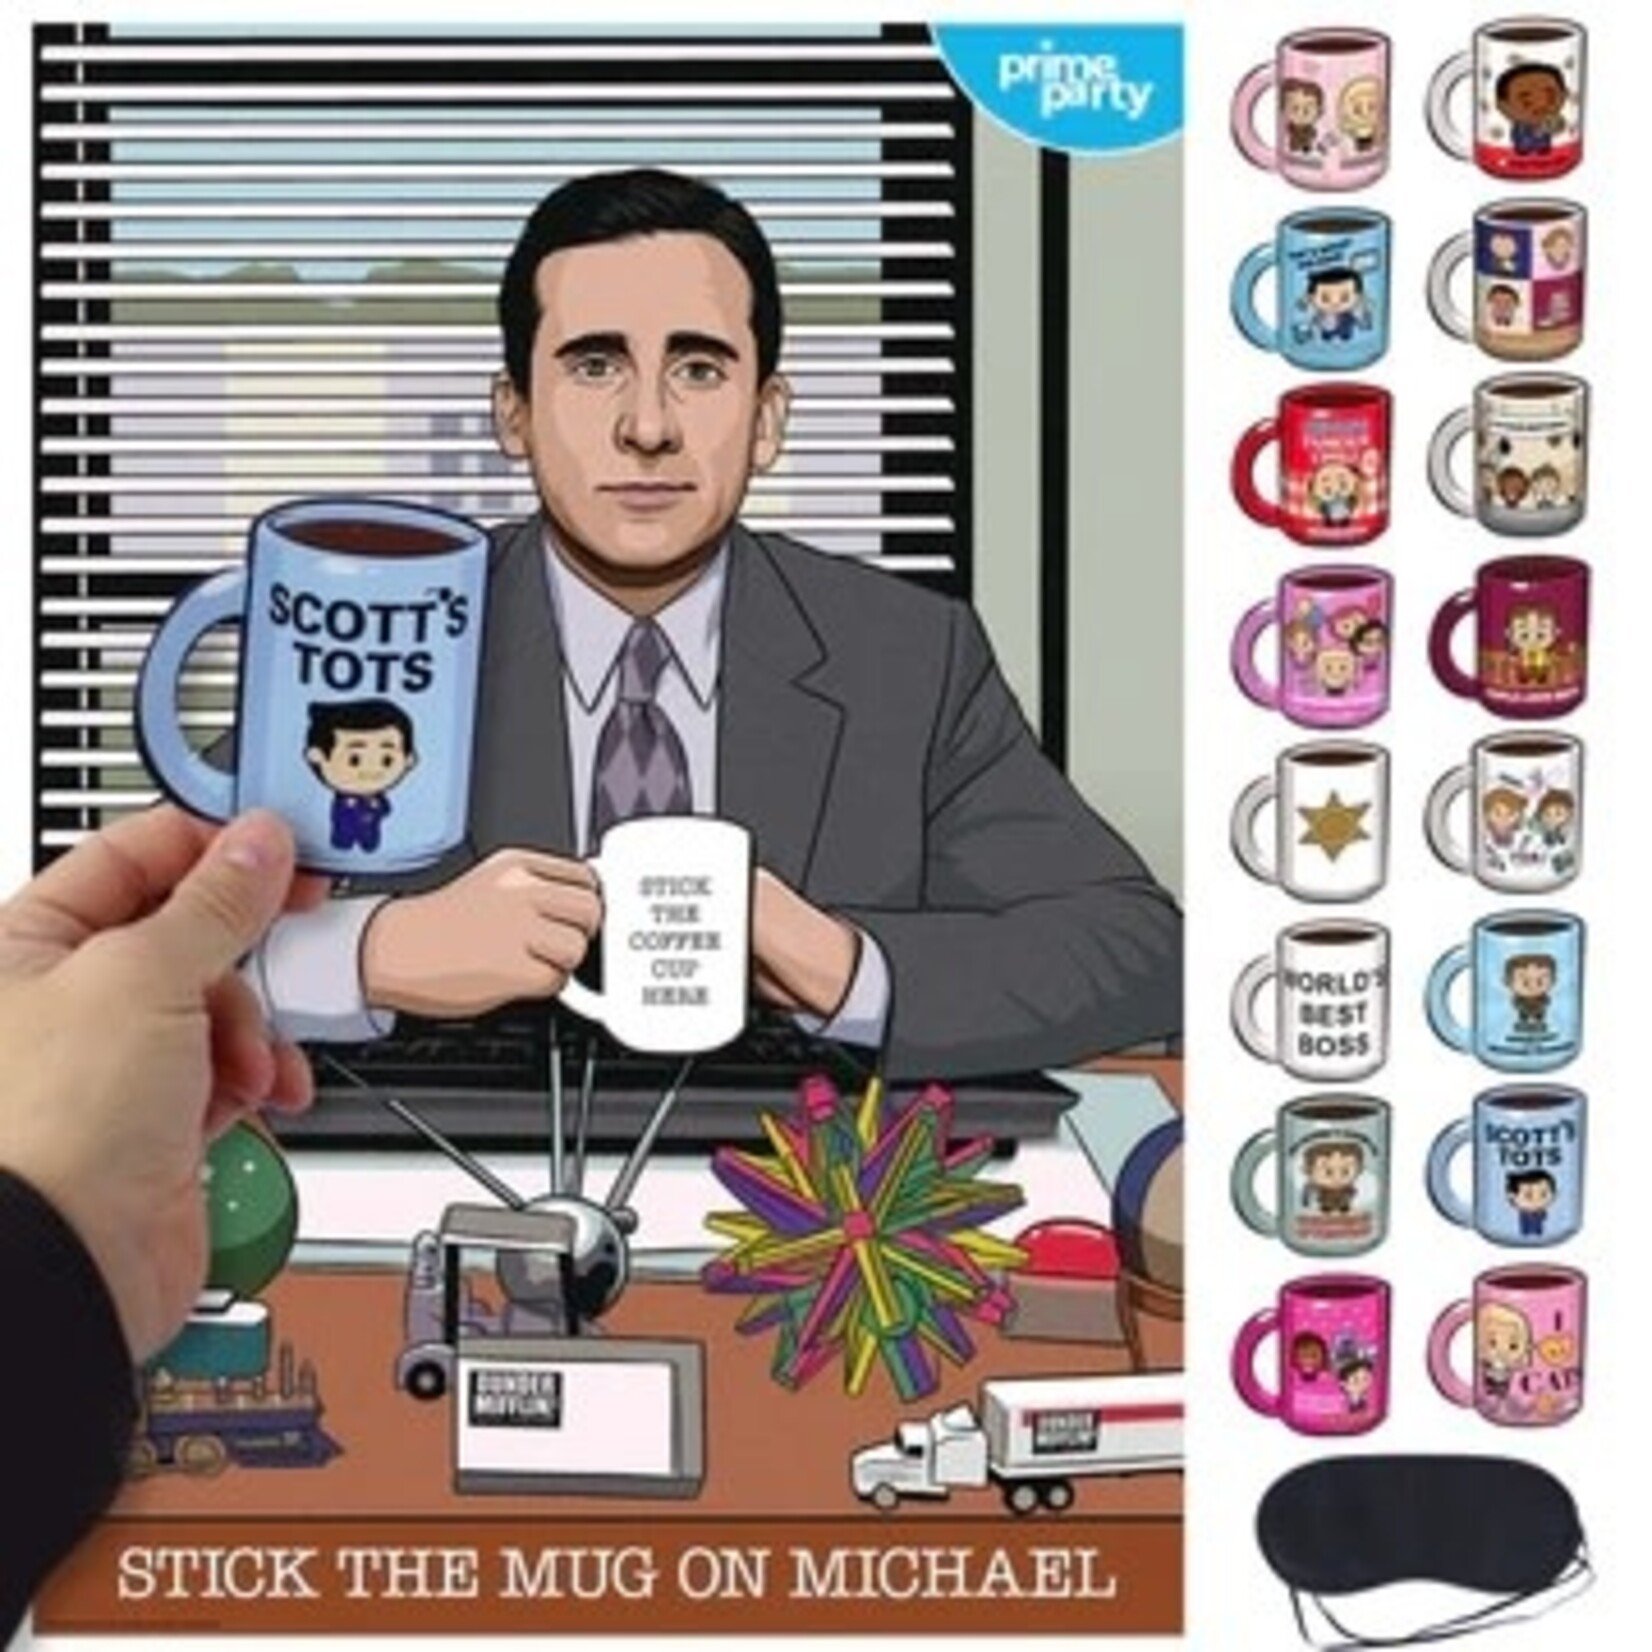 Prime Party The Office "Stick The Cup" Party Game - 16ct.